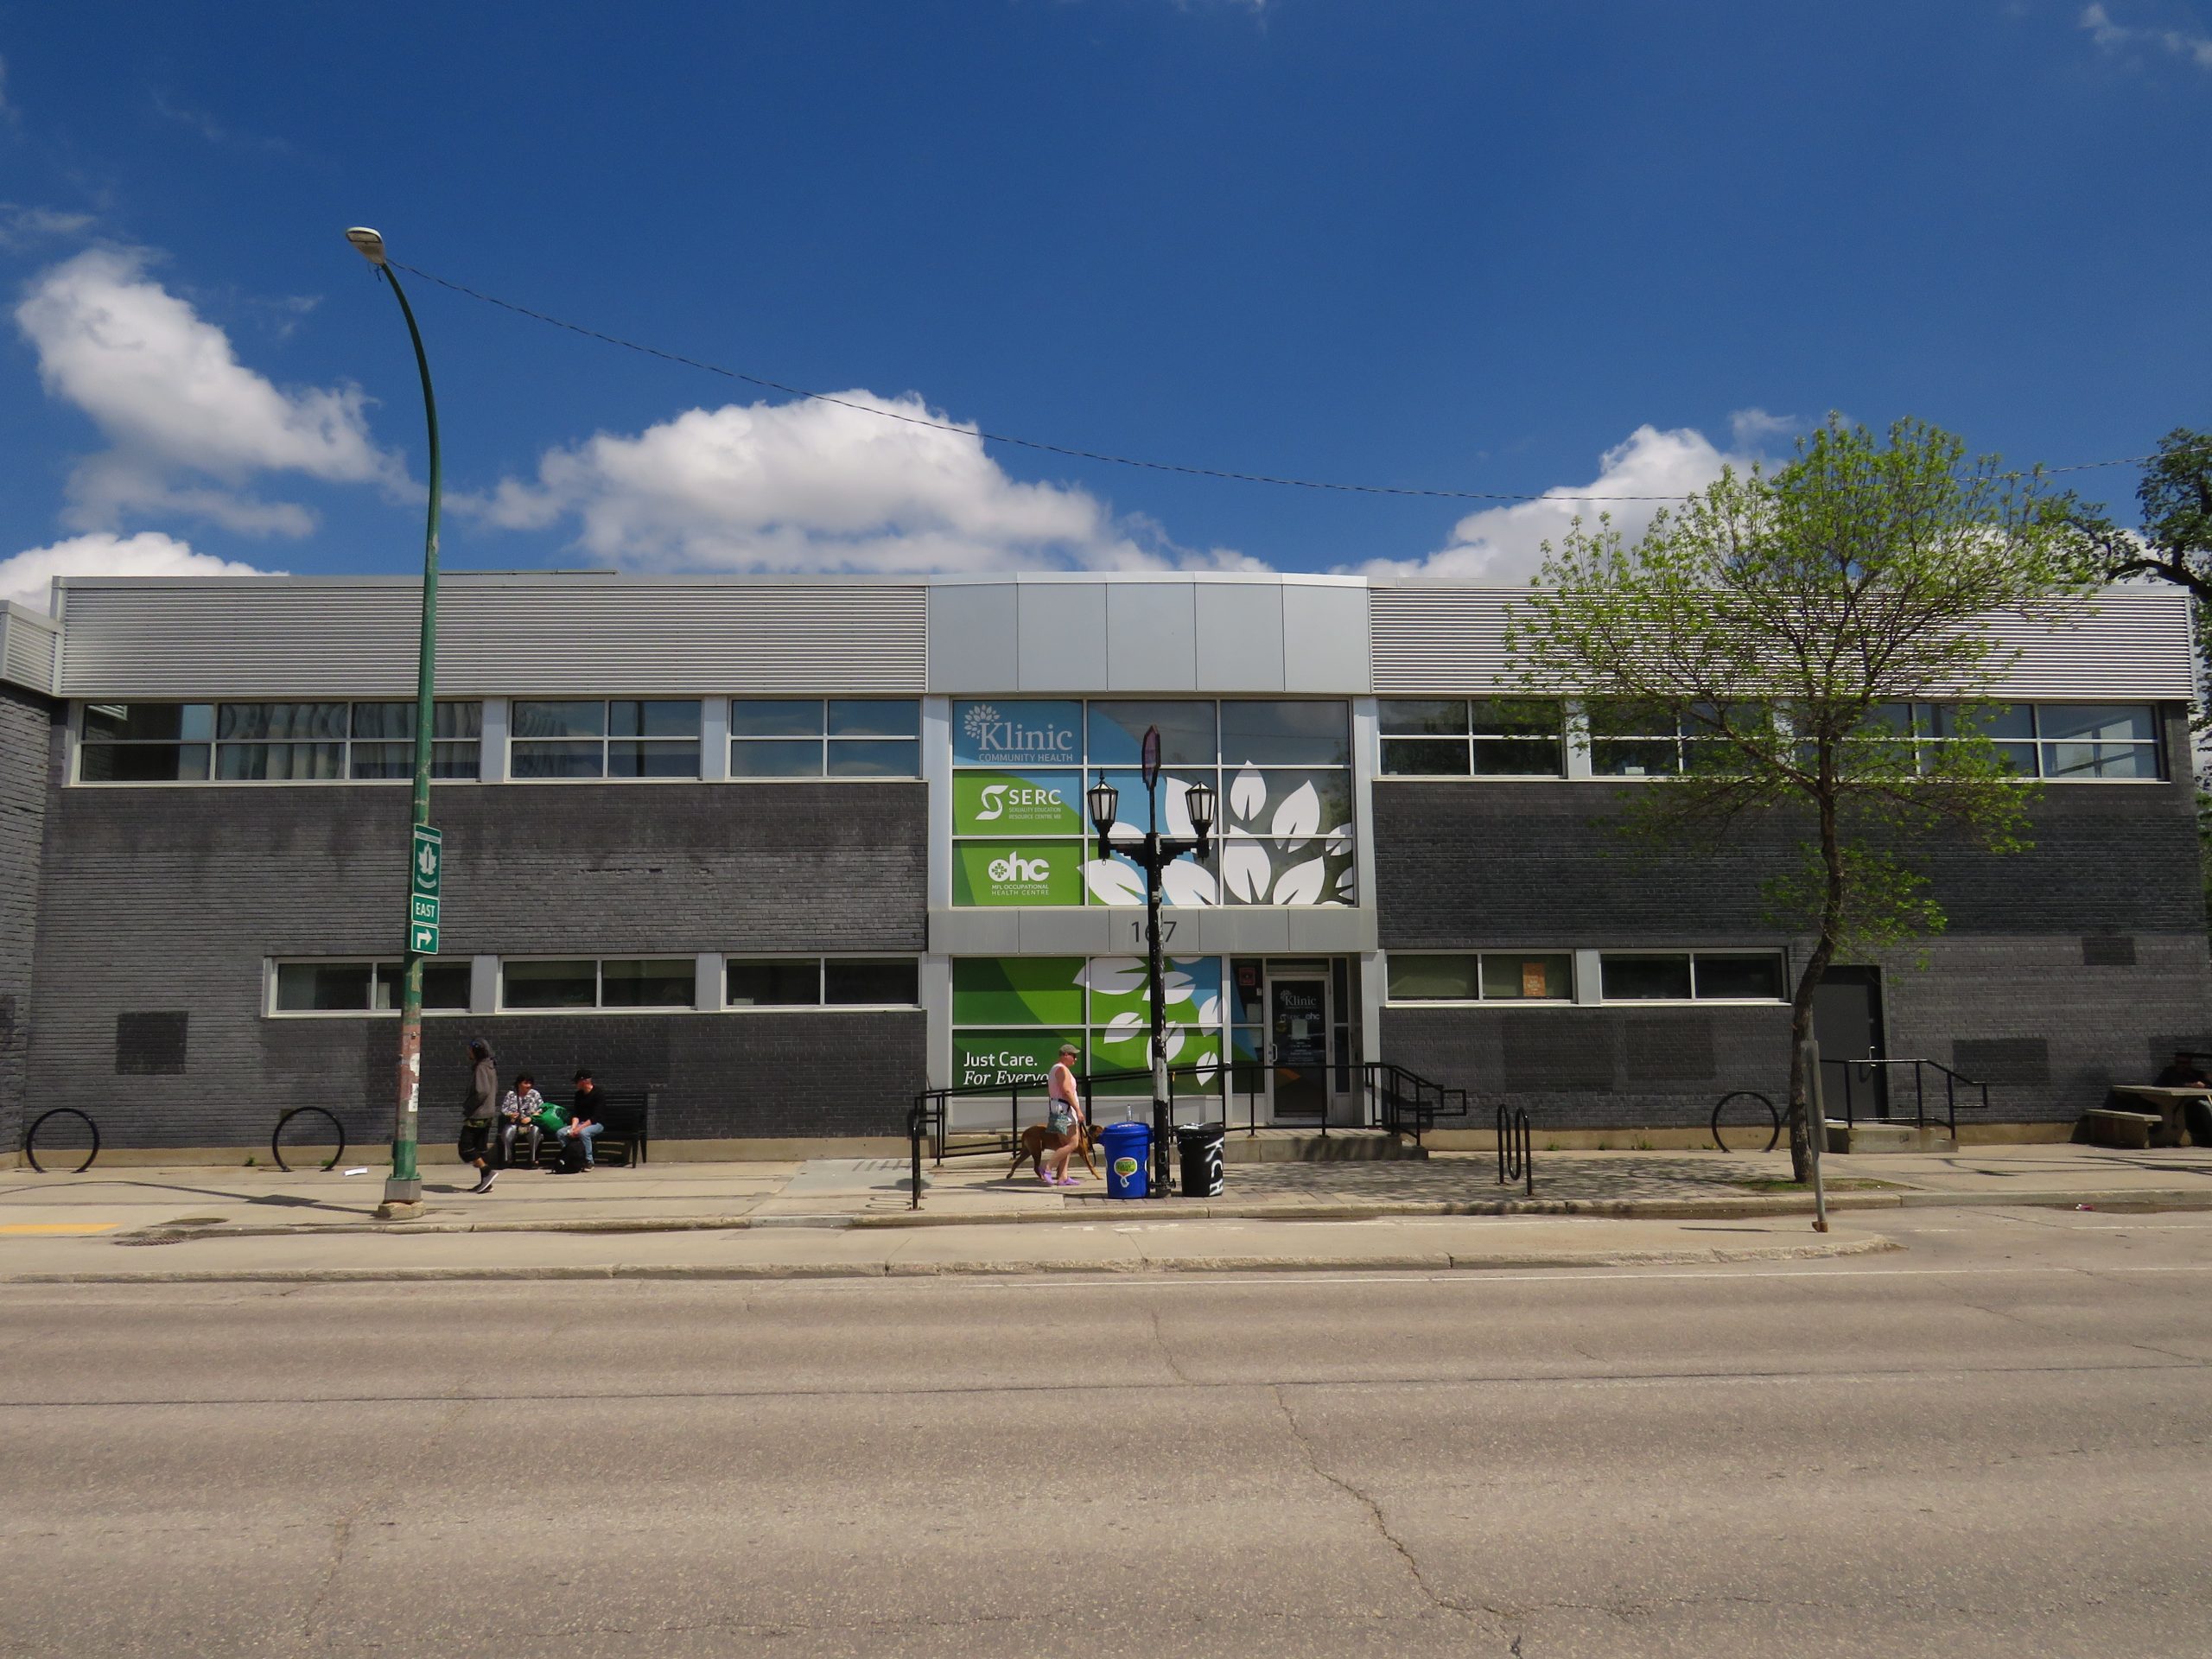 The exterior of 167 Sherbrook St. The building is grey brick with a large green and blue sign in the window listing the organisations in the building, Klinic, SERC, and OHC.